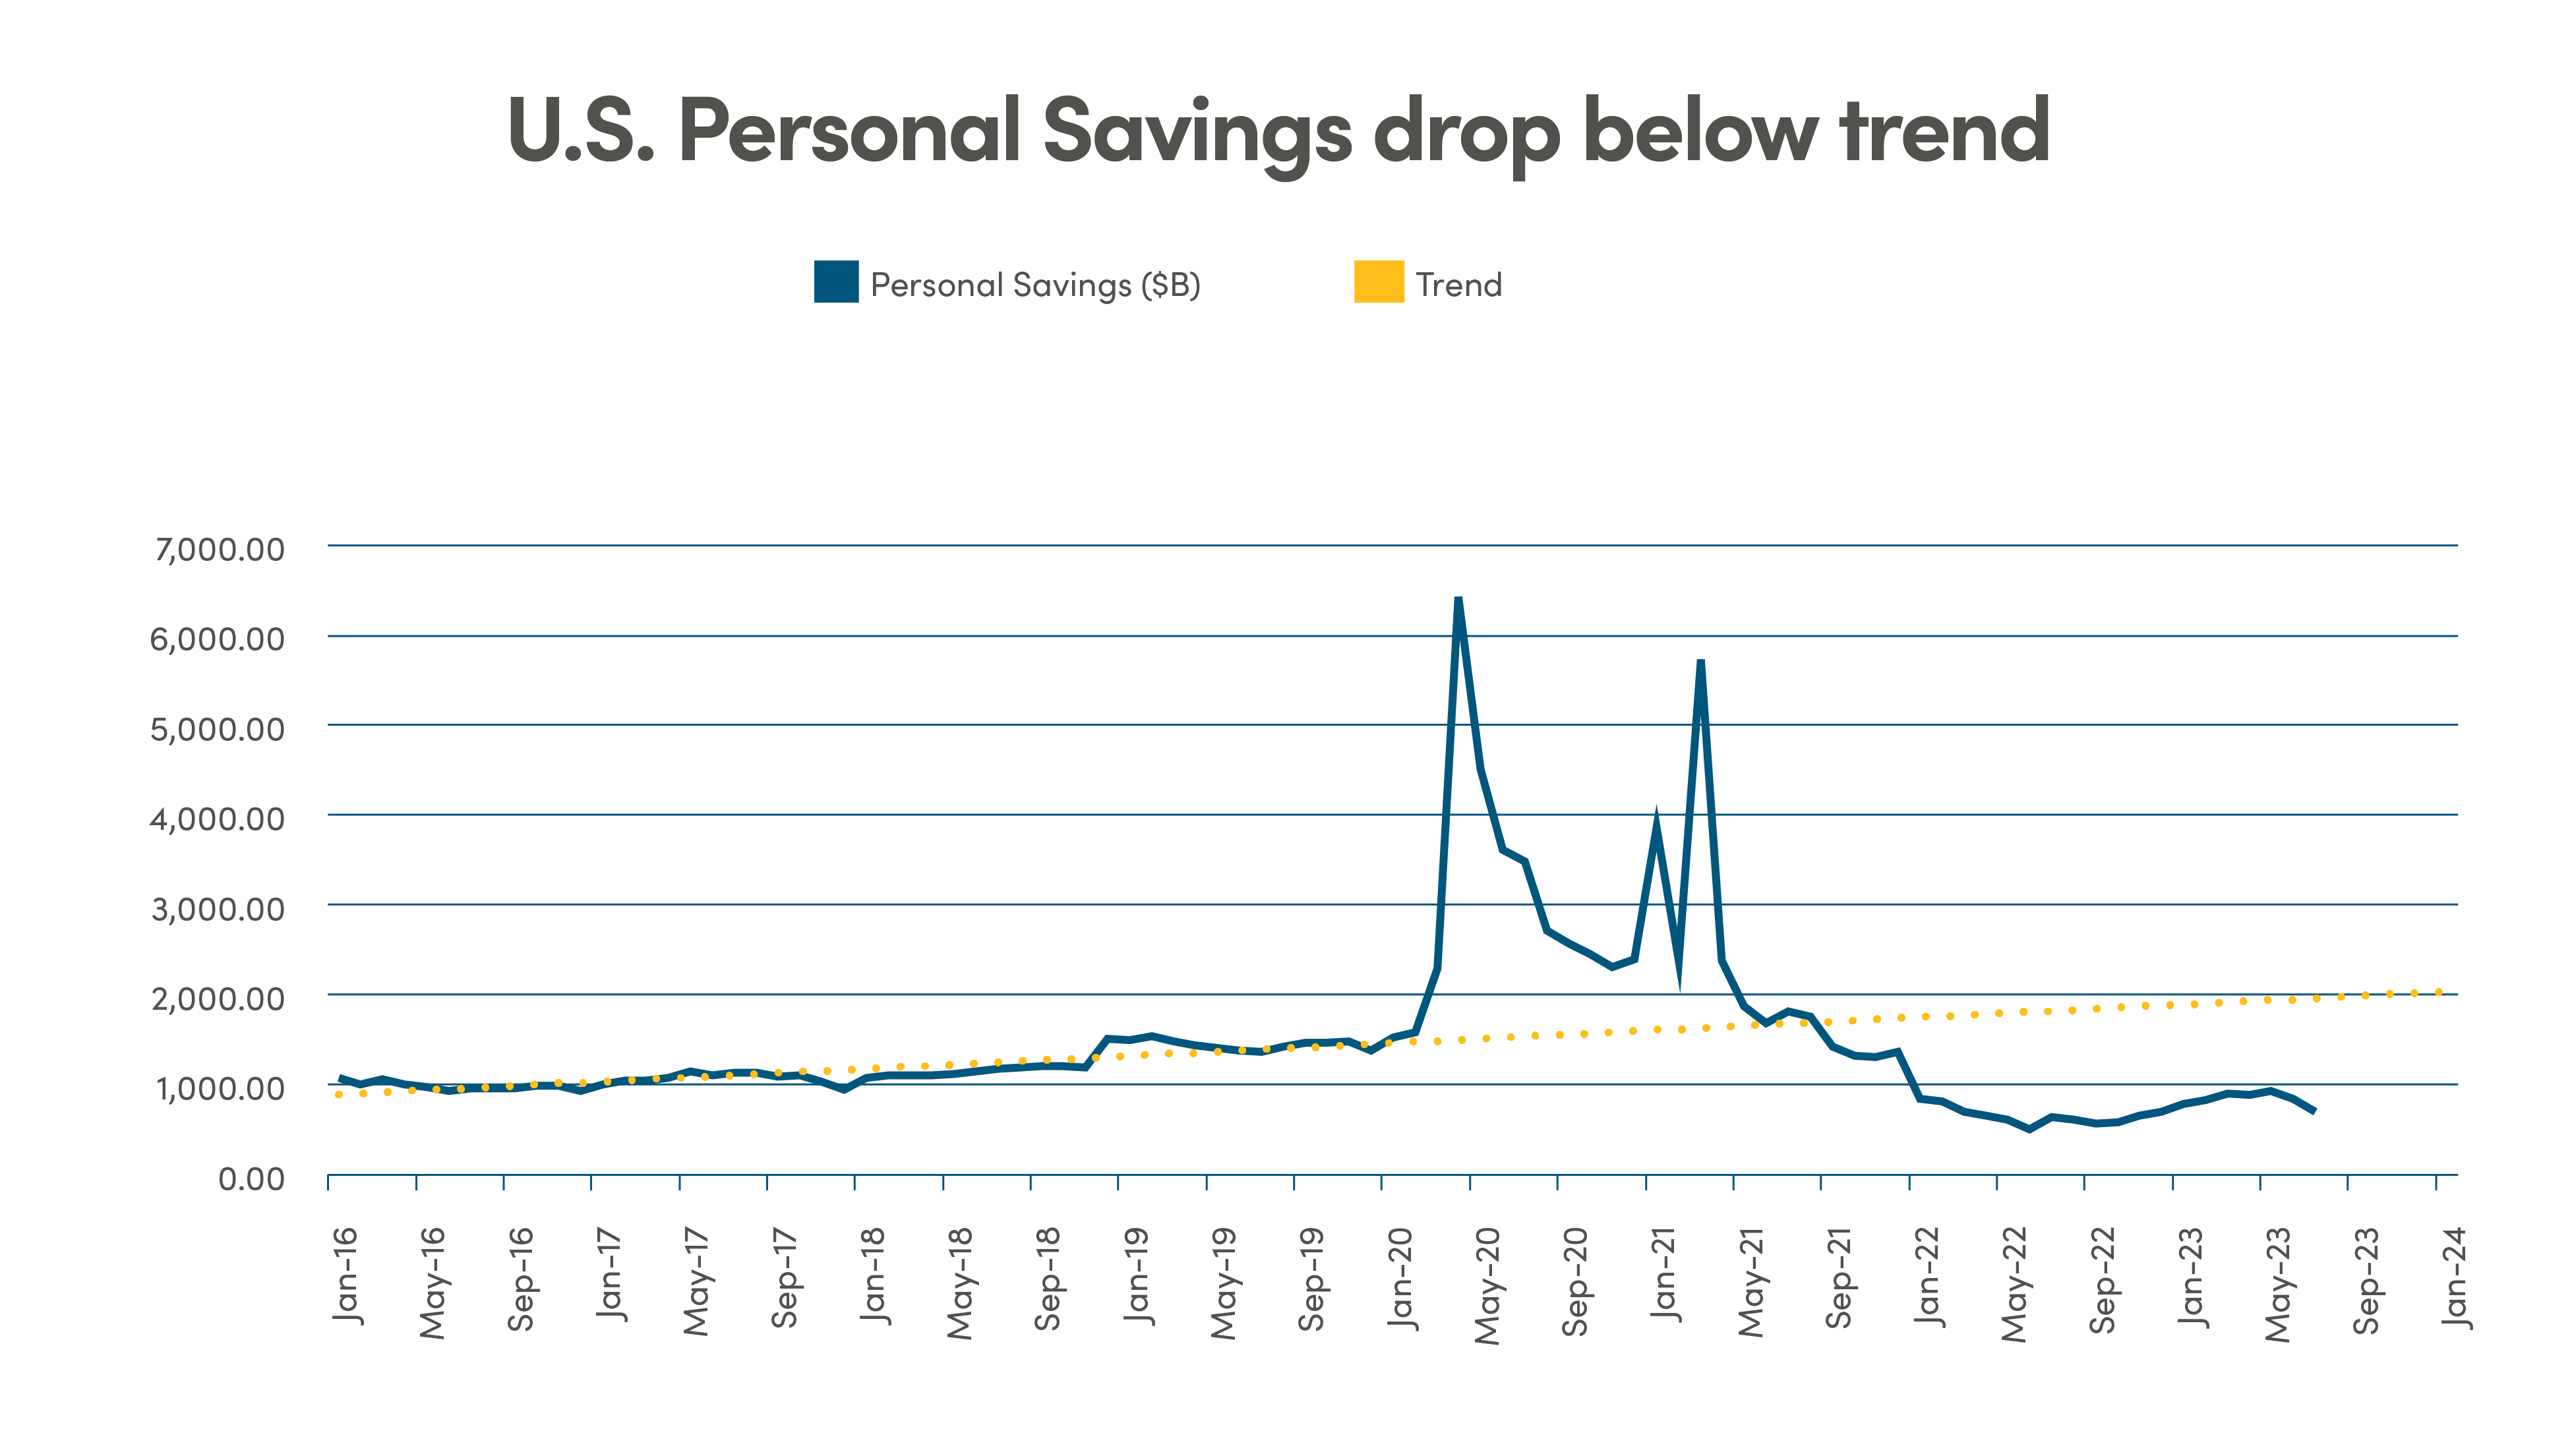 Line graph comparing US personal savings from January 2016 to January 2024. Solid line showing personal savings in billions (high in 2021). Dotted line showing trend with a slight increase from 1B to 2B